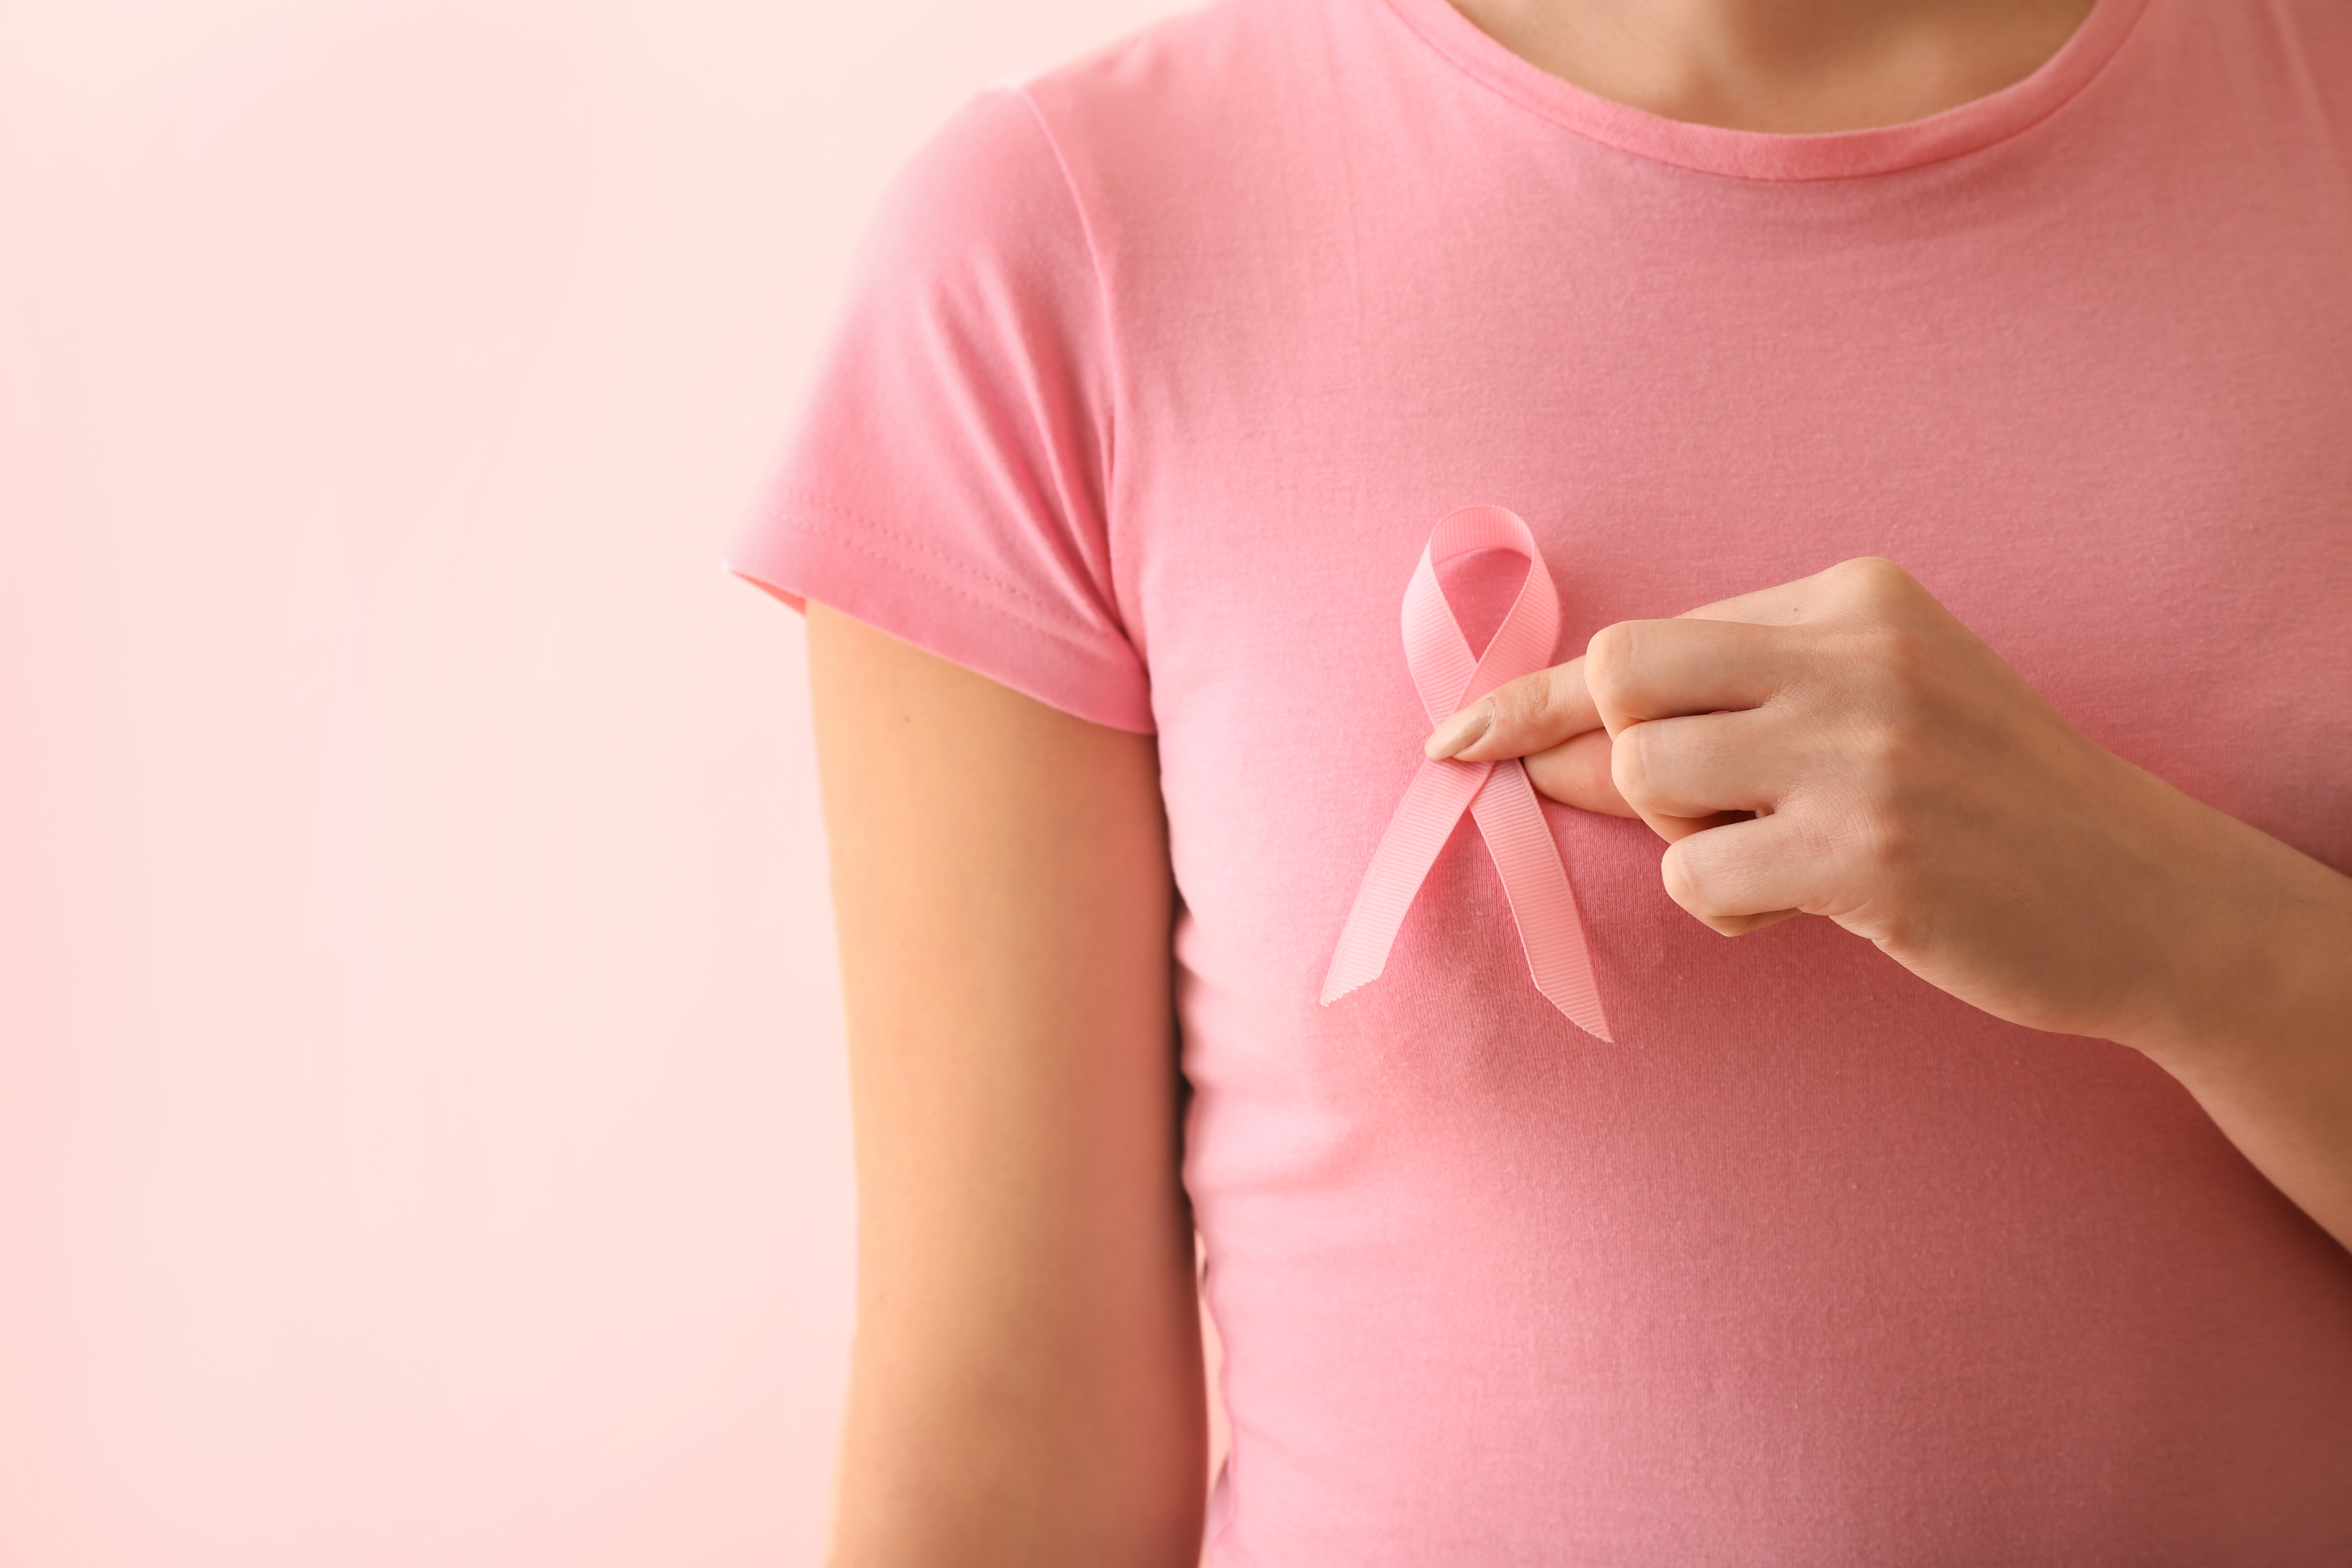 VNA Women’s Health Care: Know The Facts About Breast Cancer And Understand Your Risk